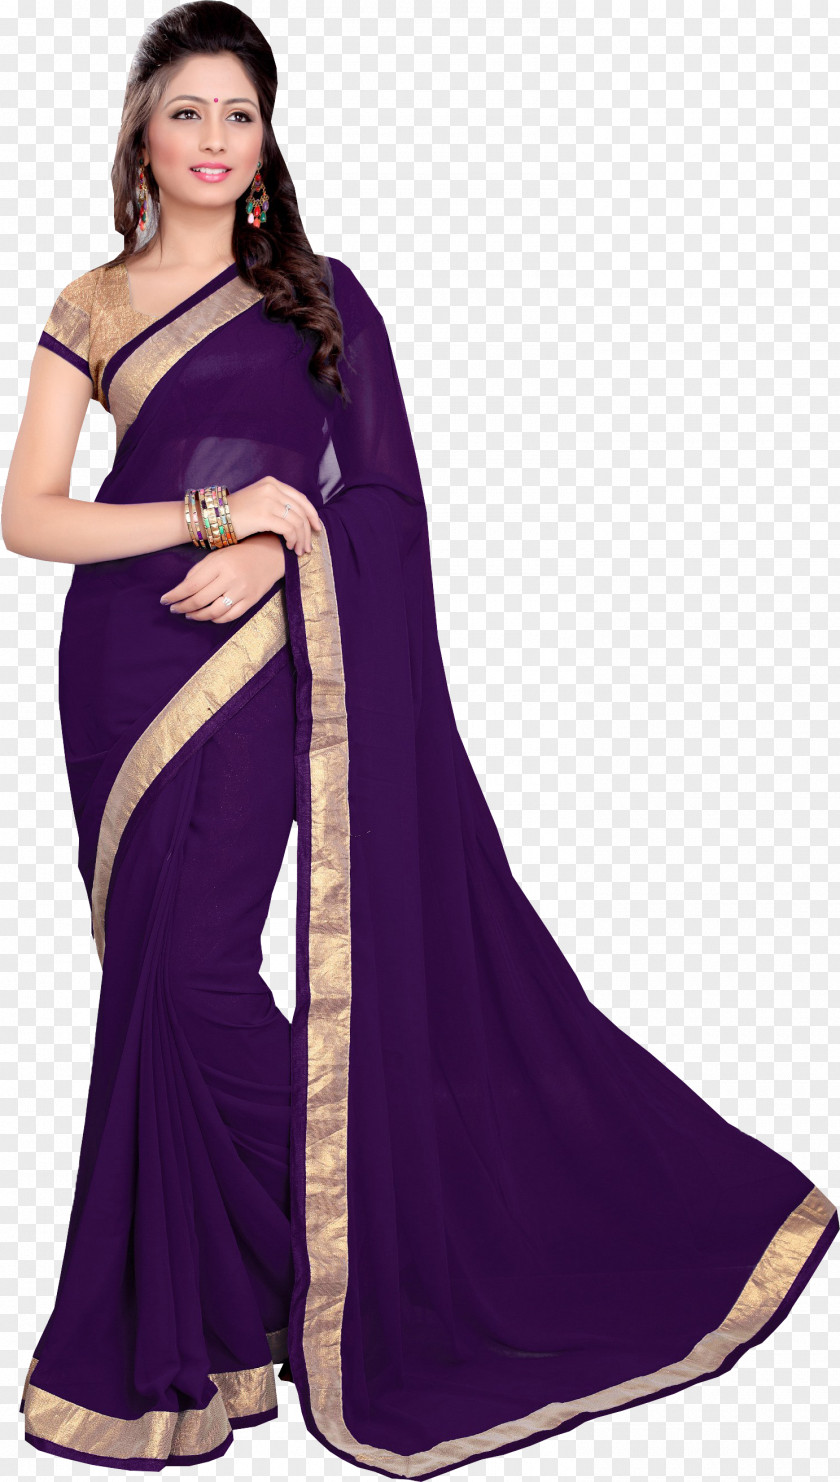 Chanderi Sari Fashion Georgette Clothing PNG Clothing, indian girl, woman wearing purple and beige saree dress clipart PNG